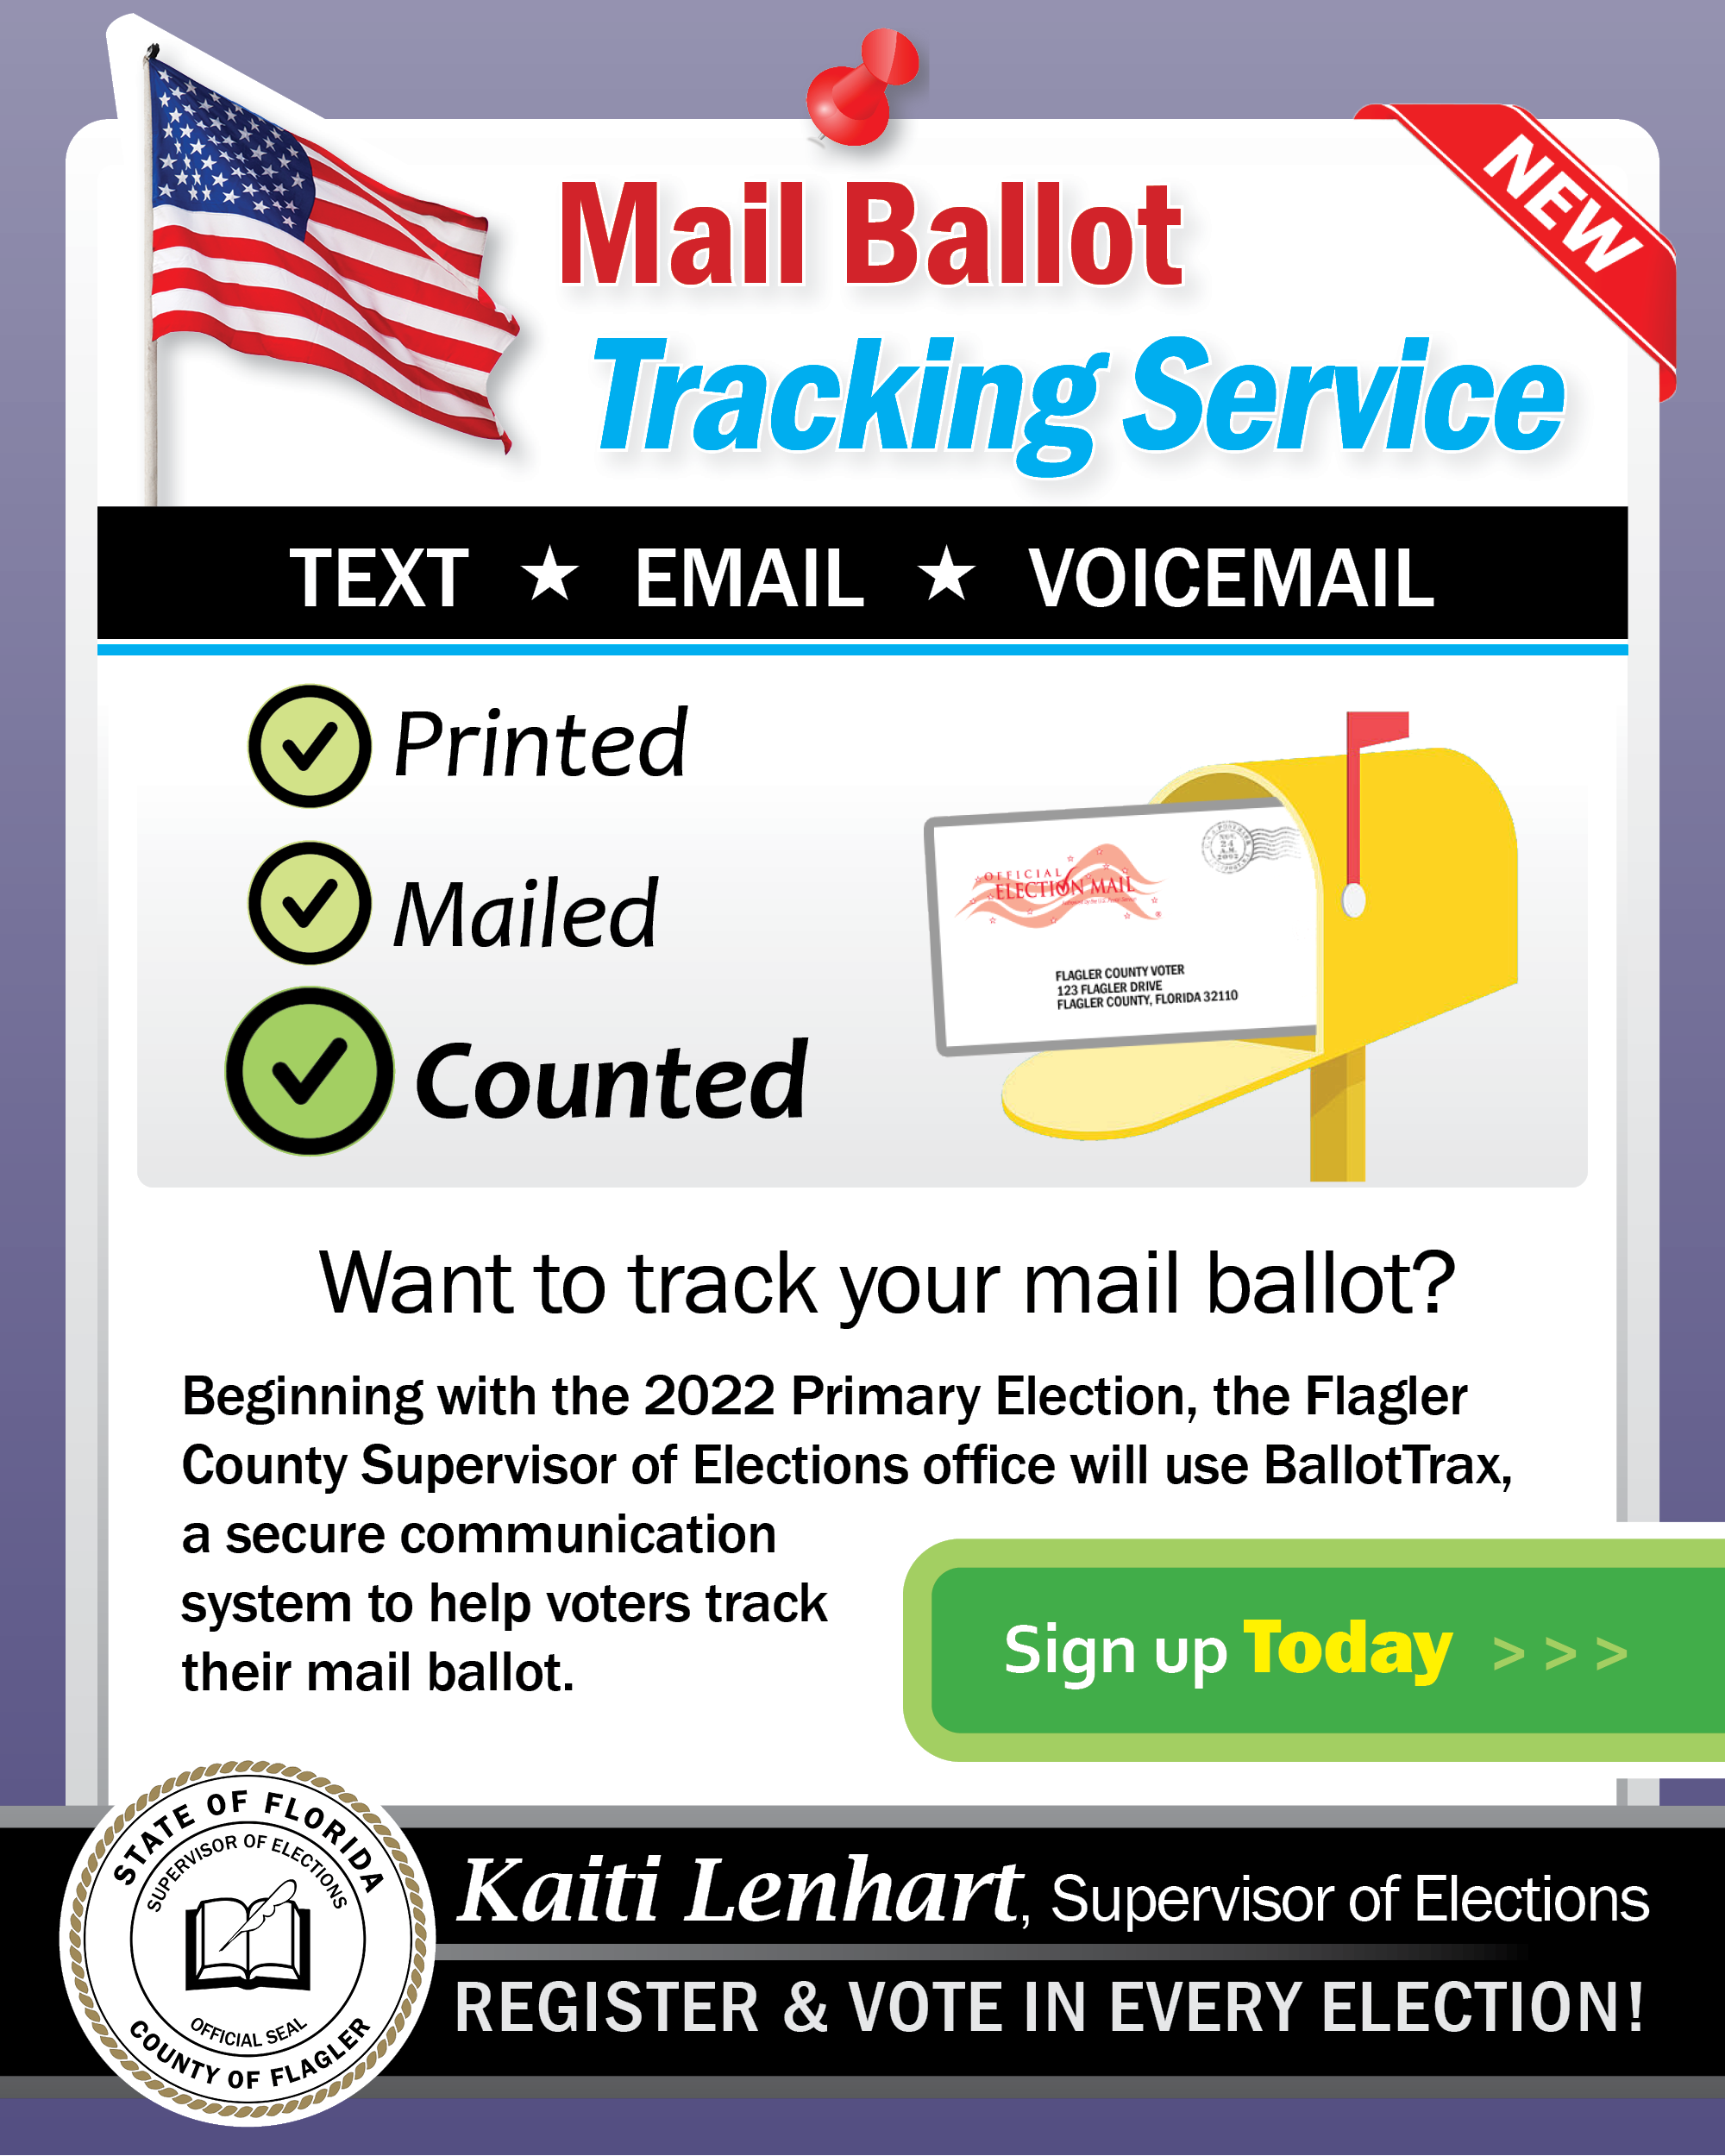 Sign up for Ballot Trax and track your mail ballot